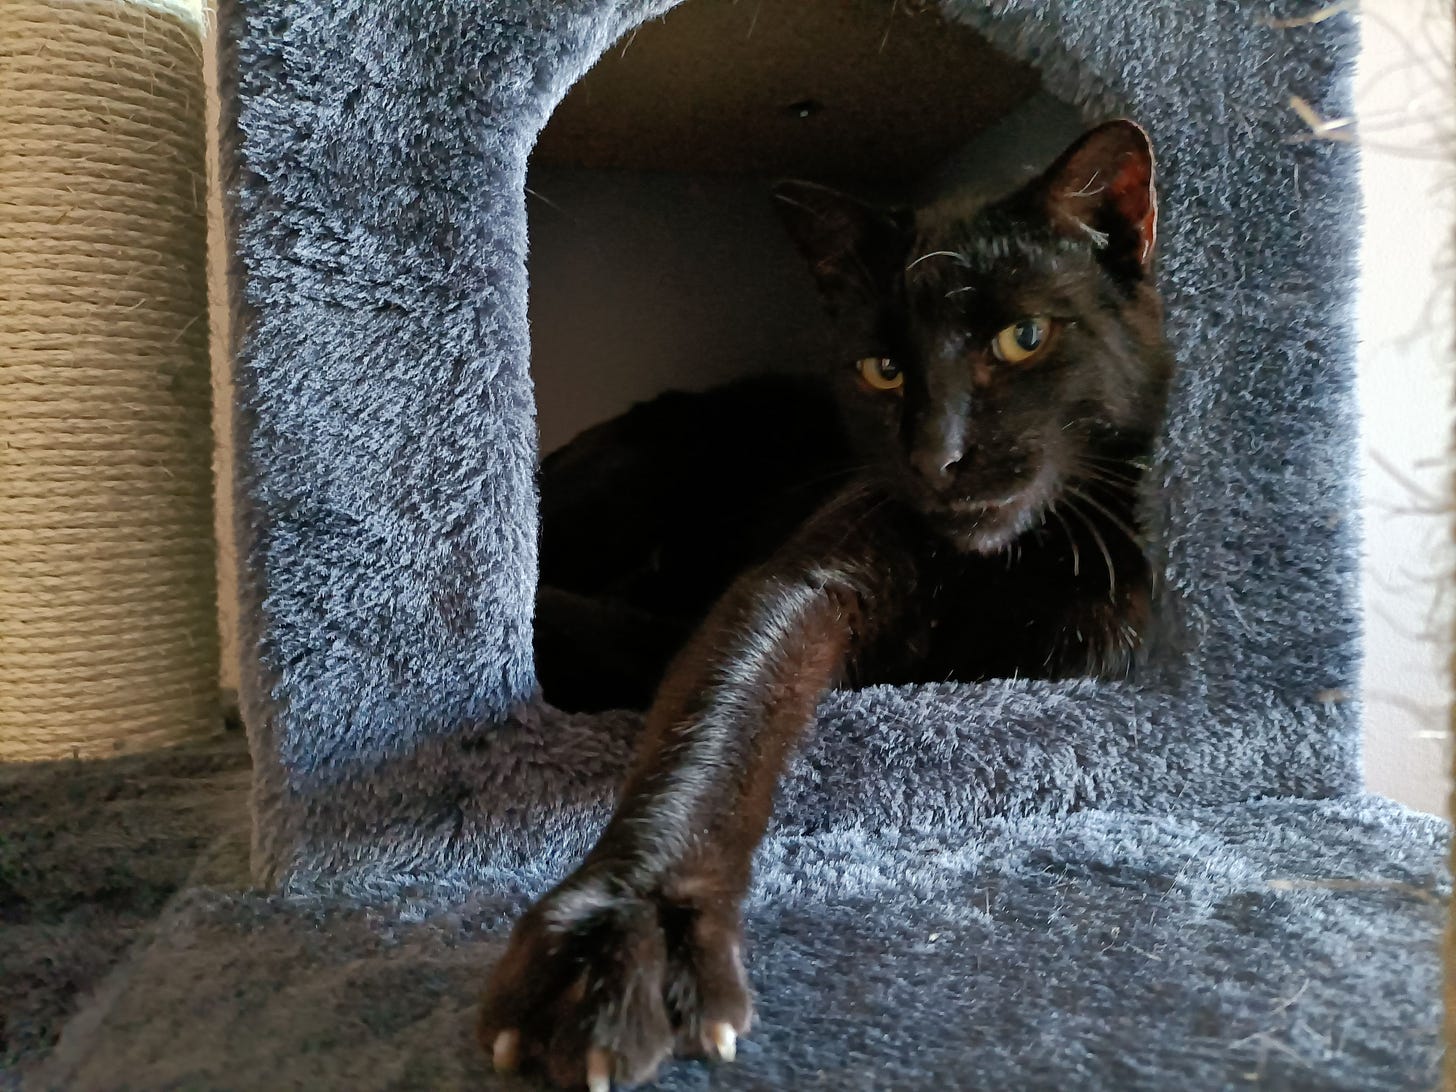 Odo is my cat. He's a black cat and in this photo he's chilling in his tree, reaching out with a paw